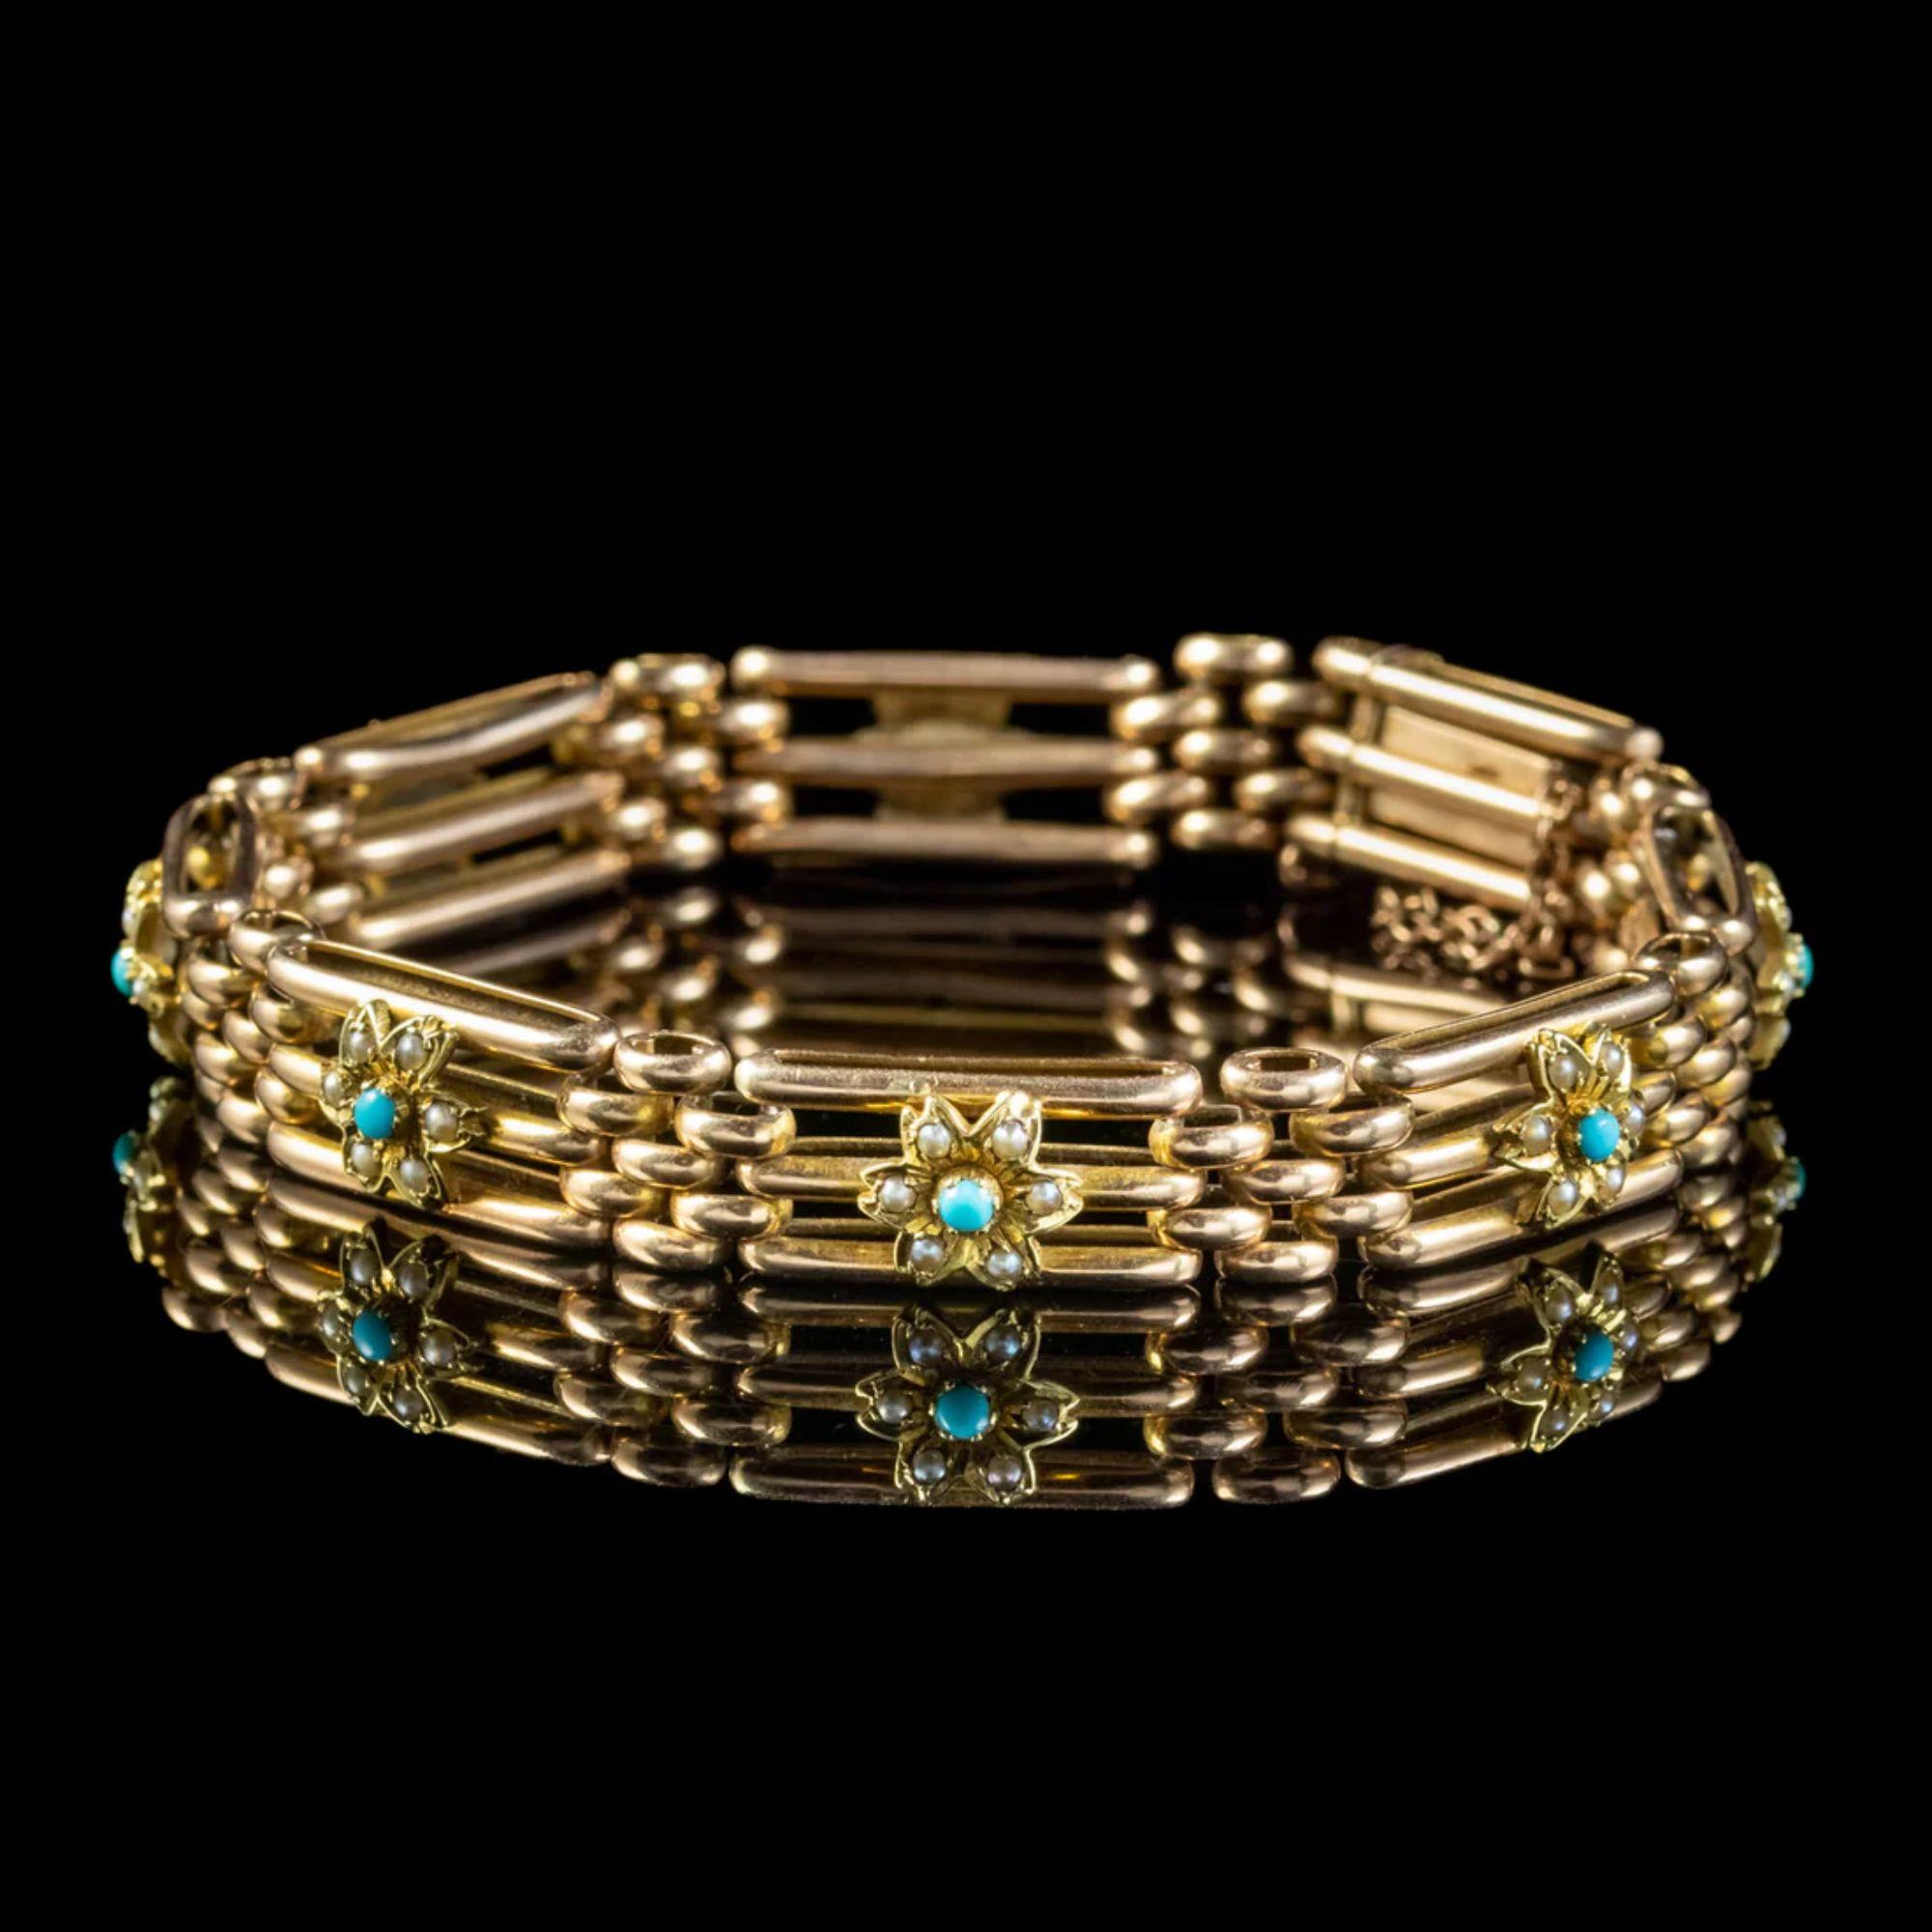 A grand antique Victorian bracelet from the late 19th Century made up of fabulous 15ct gold gate links topped with beautiful turquoise and pearl studded flowers in the centre of each. 

The links articulate beautifully together and have a good